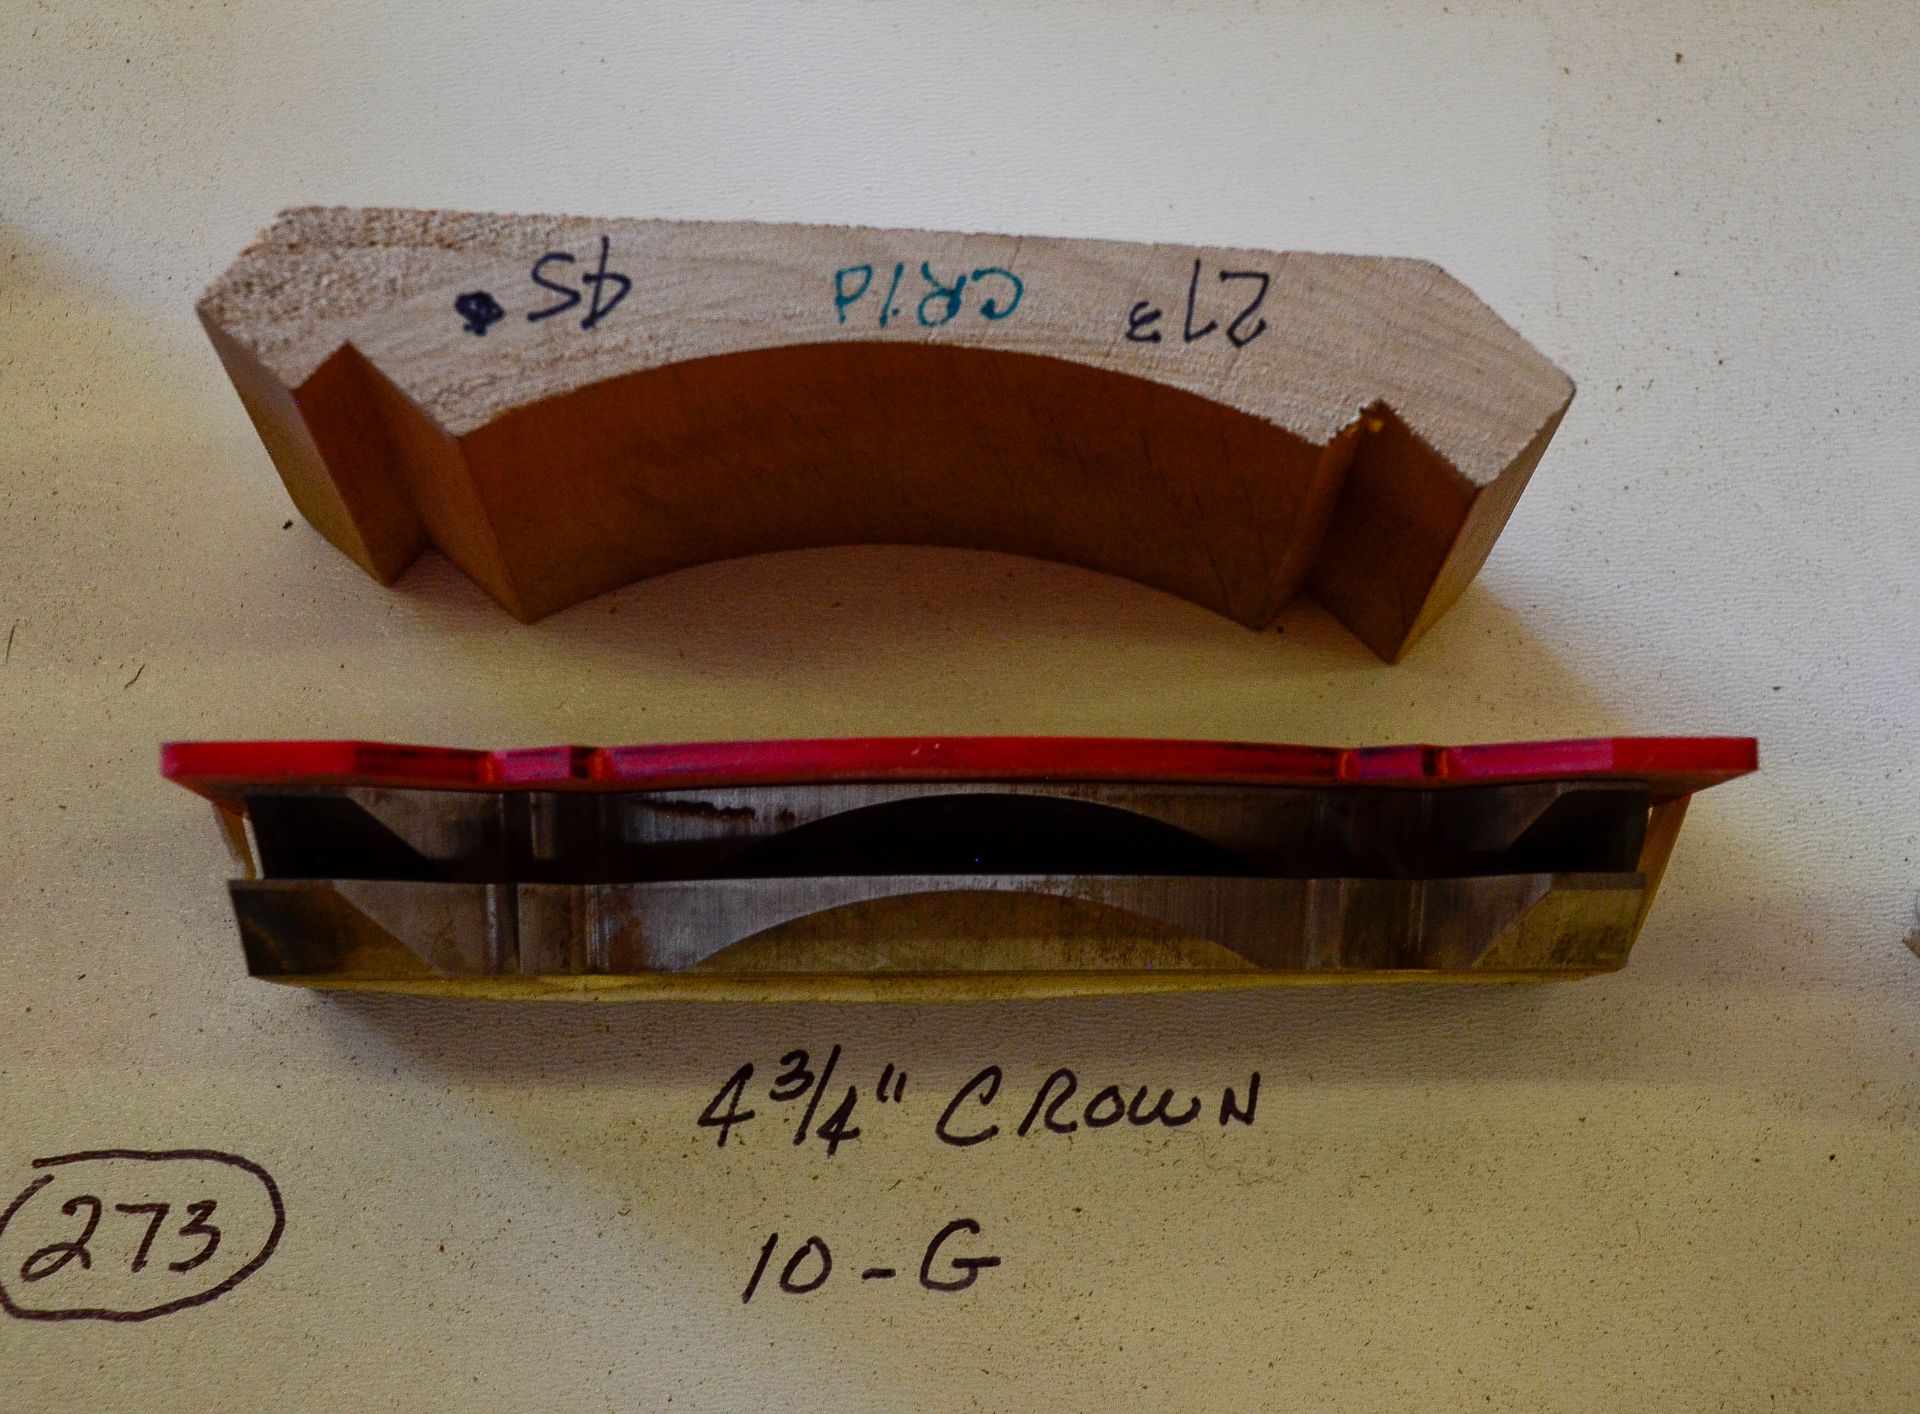 Moulding Knives, 4-3/4" Crown, 10 - G = 13/16", Knives are in Good Condition and Ready to Use (U.N - Image 2 of 2